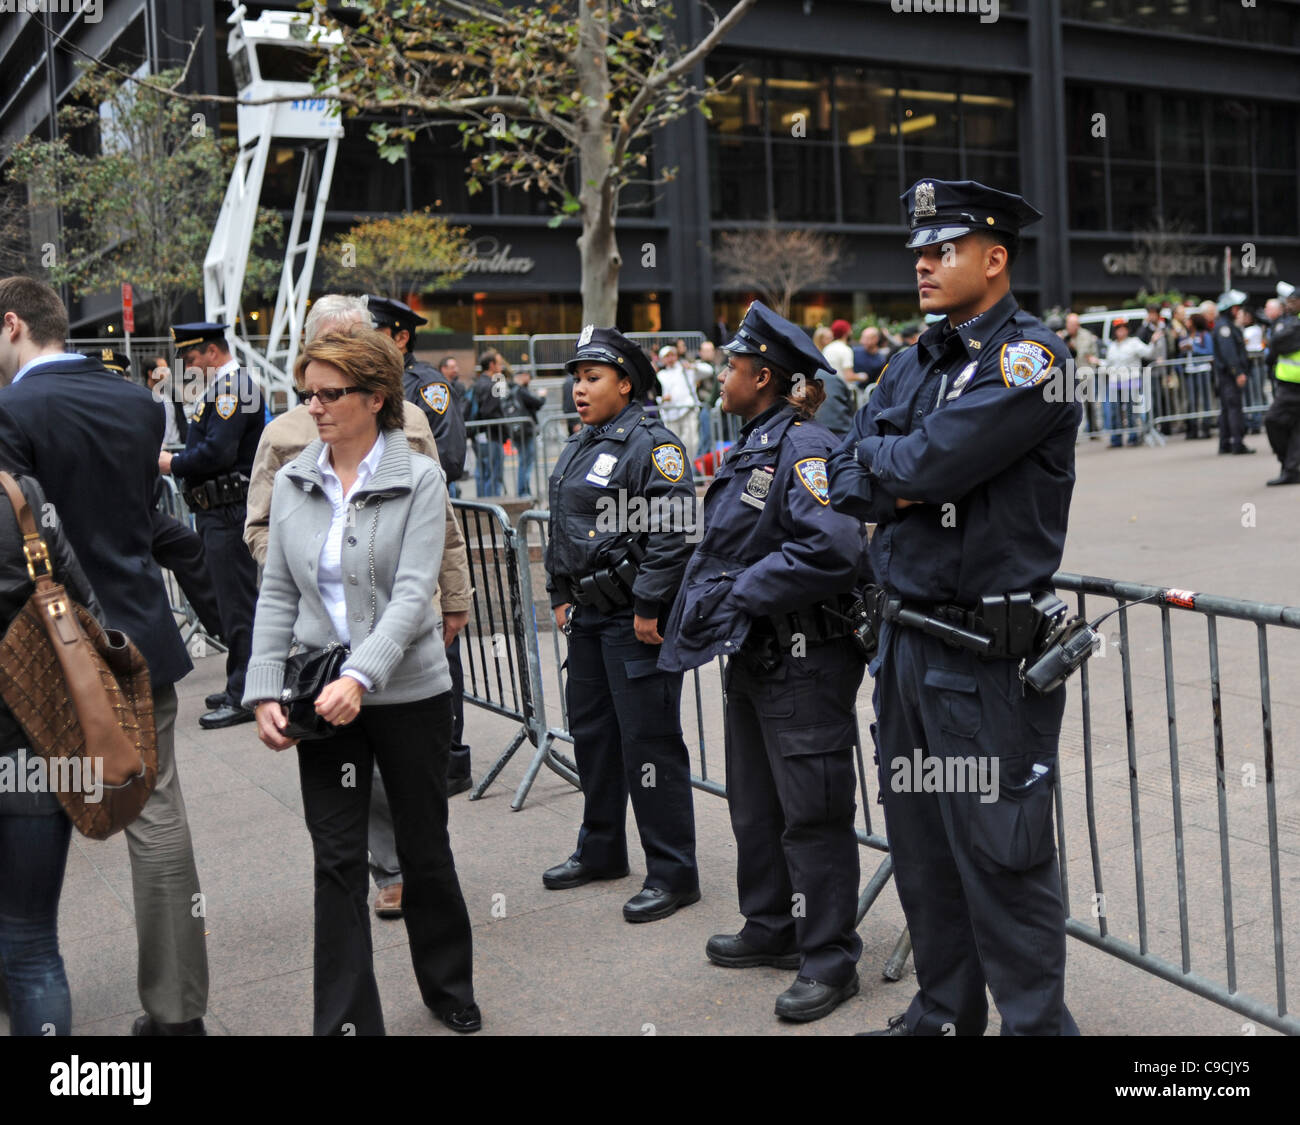 Protesters tourists and police from NYPD at the Occupy Wall Street demonstrations in Manhattan New York USA .  November 2011 Stock Photo